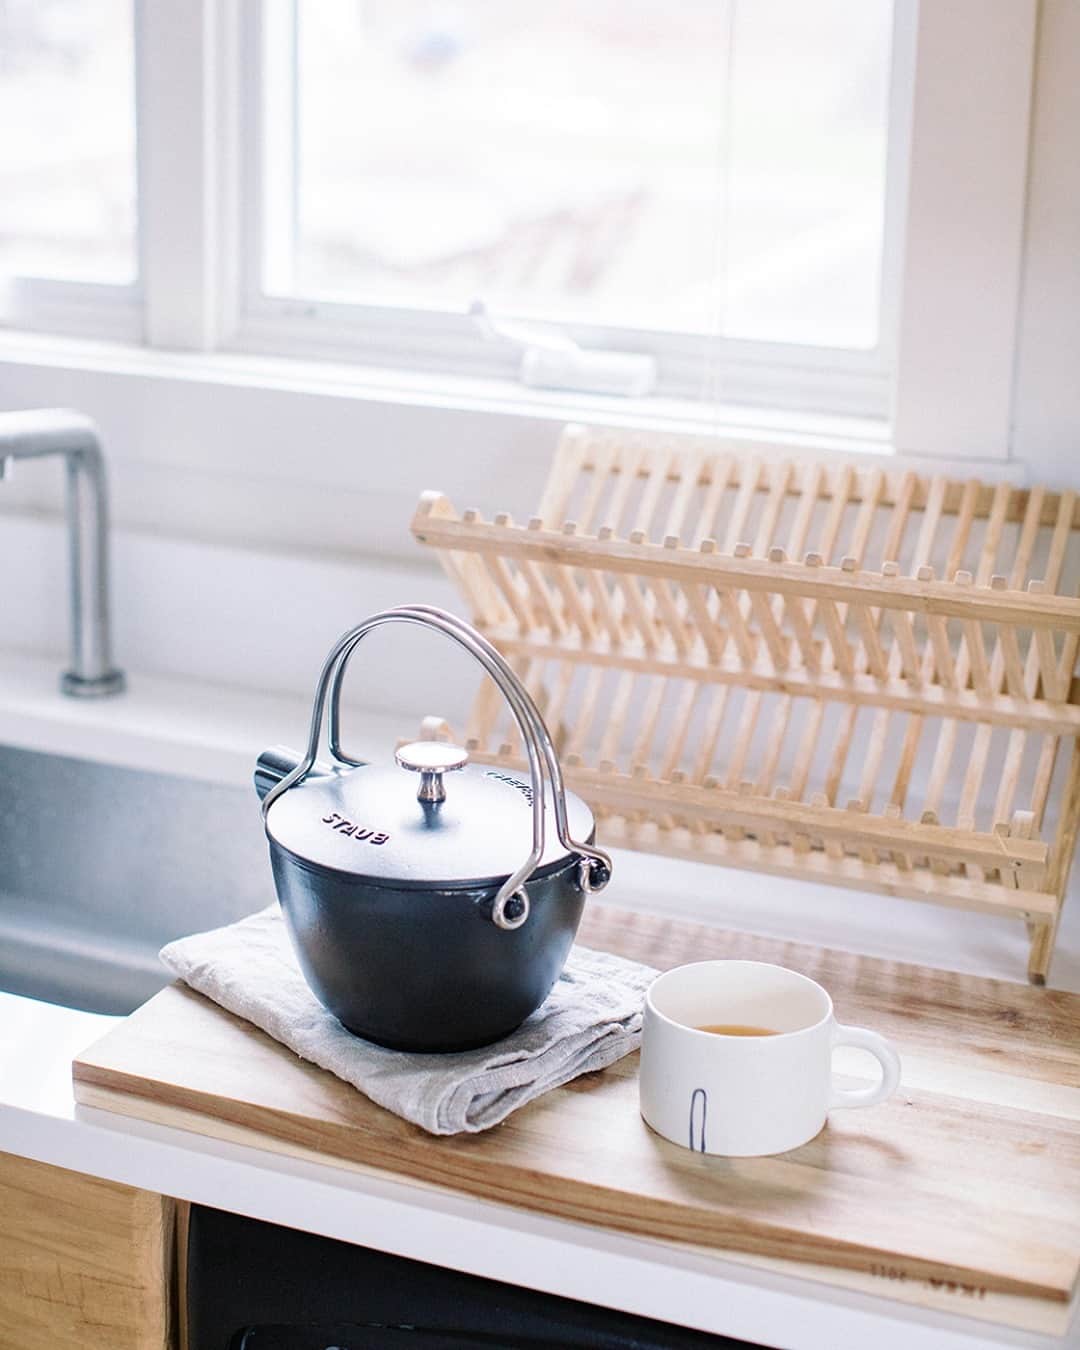 Staub USA（ストウブ）のインスタグラム：「Upgrade your everyday tea experience into something a little fancier with one of our exceptional tea kettles. They're made of enameled cast iron, they don't need to be seasoned, and you'll love how much longer they keep water hot compared to traditional ceramic vessels. Sip sip hooray! Shop our Staub kettles by tapping the link in our bio and searching "kettle." (Image: @veronicalolagrimm at @southcountyhouse) #madeinStaub」